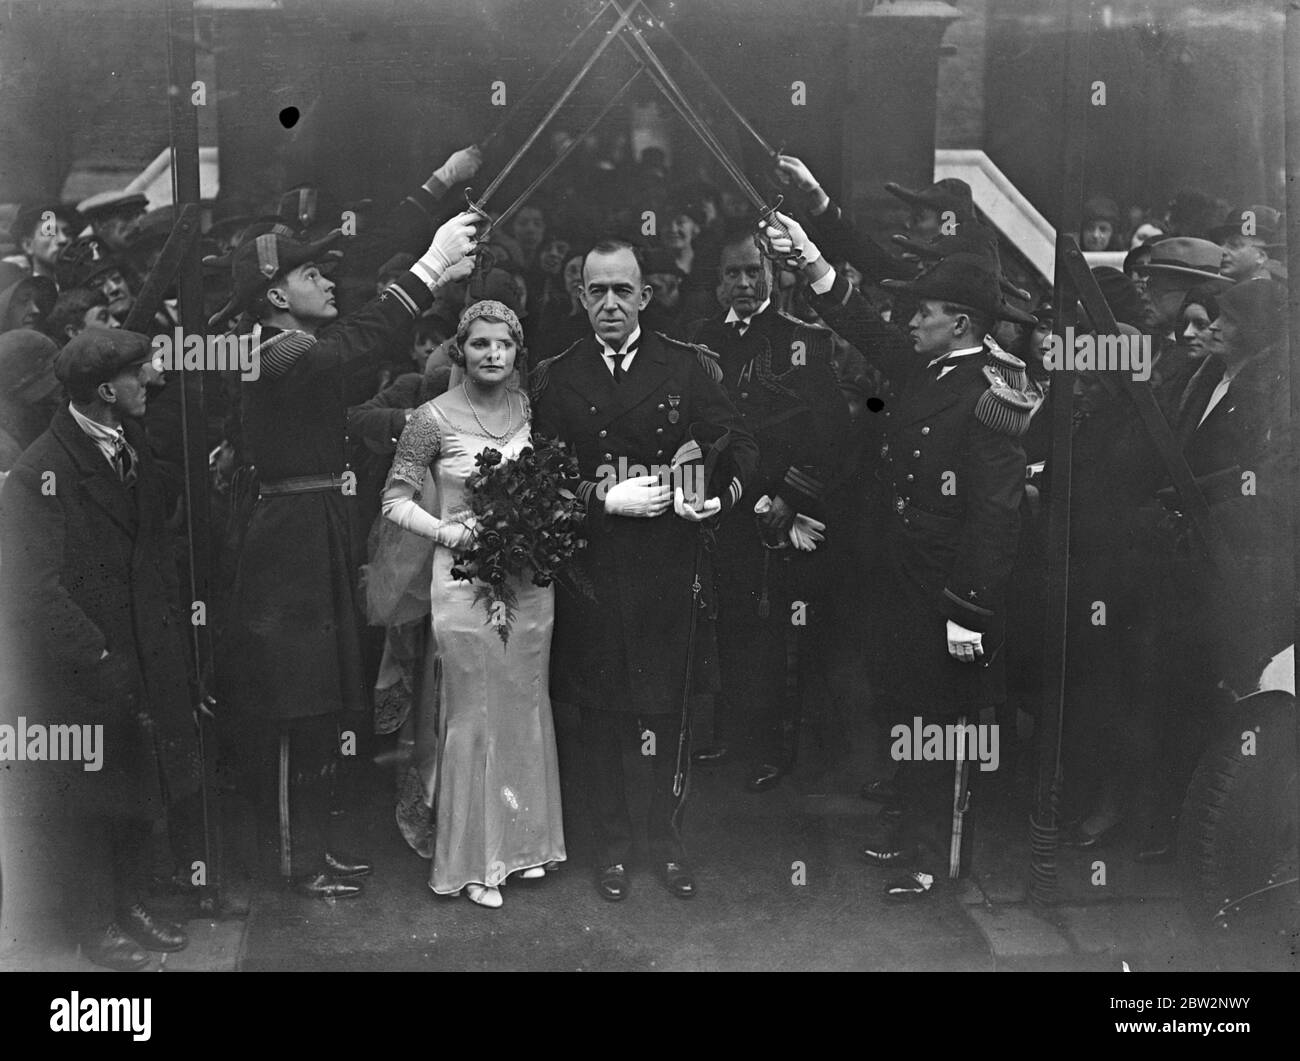 London , Anglo American wedding . American Naval Commander weds cotton heiress . The wedding of Lieut Commander Toson D Summers , Medical Corps , United States Navy , son of Thomas B Summers of Huntington , West Virginia , to Miss Cynthia Peacock , daughter of Mr and Mrs Jack Peacock , of Burleagh , Derby took place at St Pauls Church , Knightsbridge , London . Captain Arthur L Bristol , the United States Naval Attache in London was best man , and for ushers the United States naval officers who are Rhodes scholars at Oxford University attended . The bride 's father is a partner in the cotton f Stock Photo